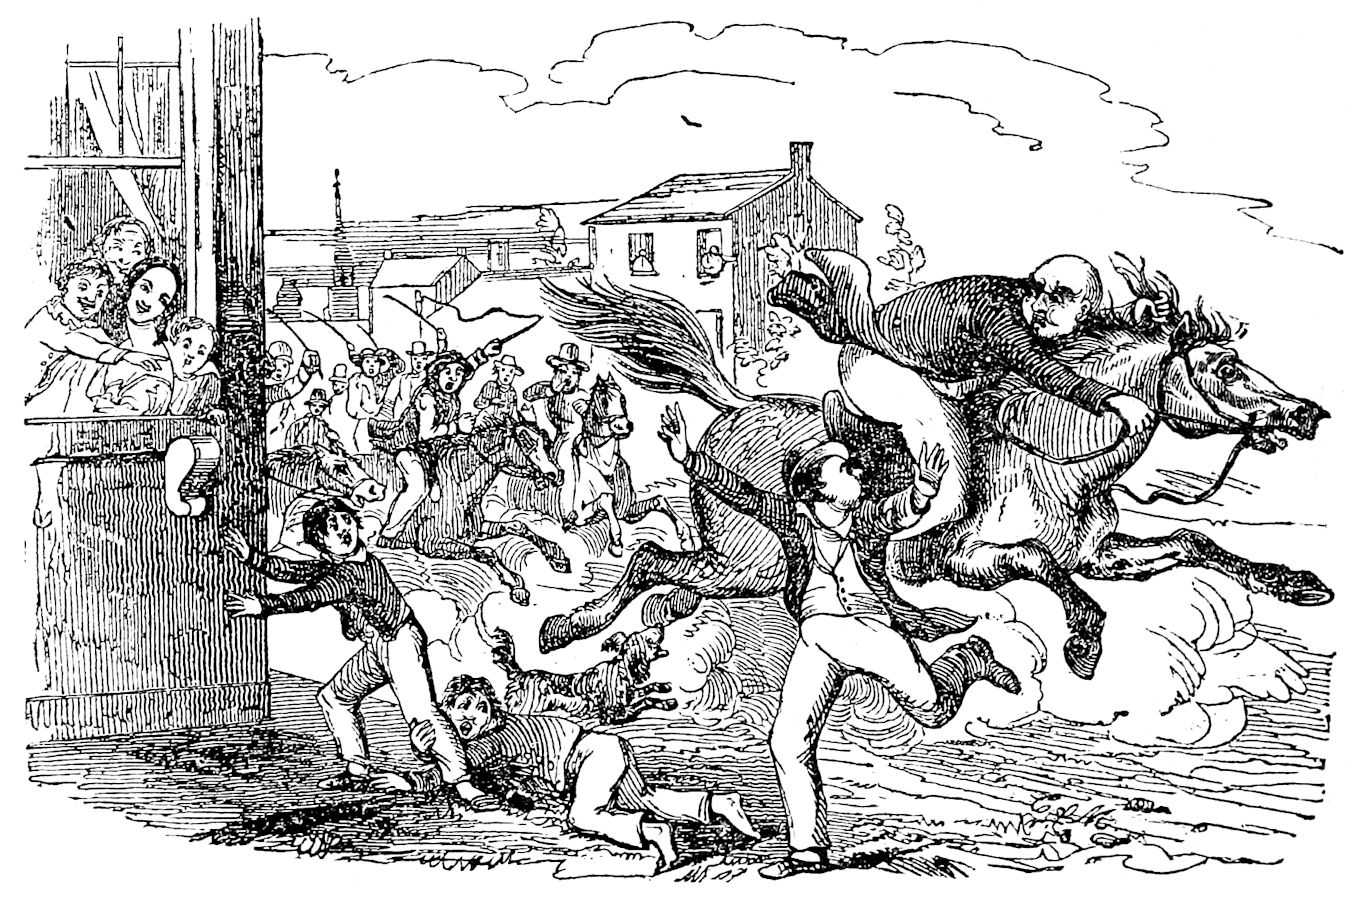 A man clings to a horse's back while galloping wildly down a crowded street